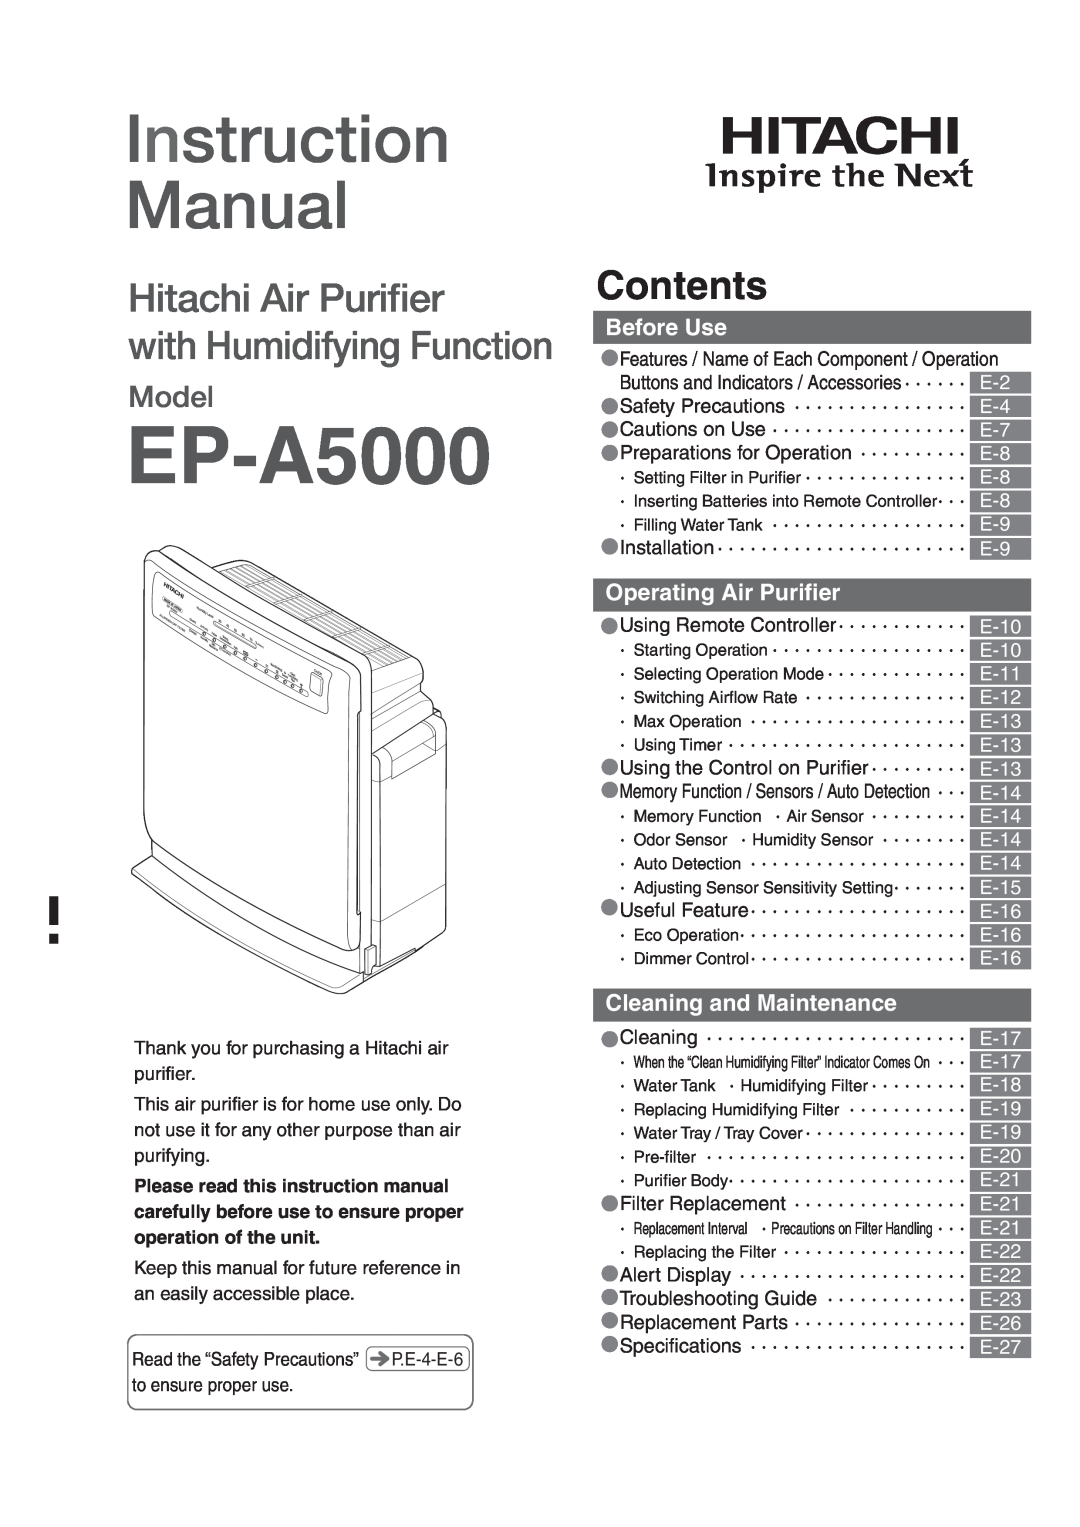 Hitachi hitachi air purifier with humidifying function instruction manual EP-A5000, Contents, Model, Before Use 